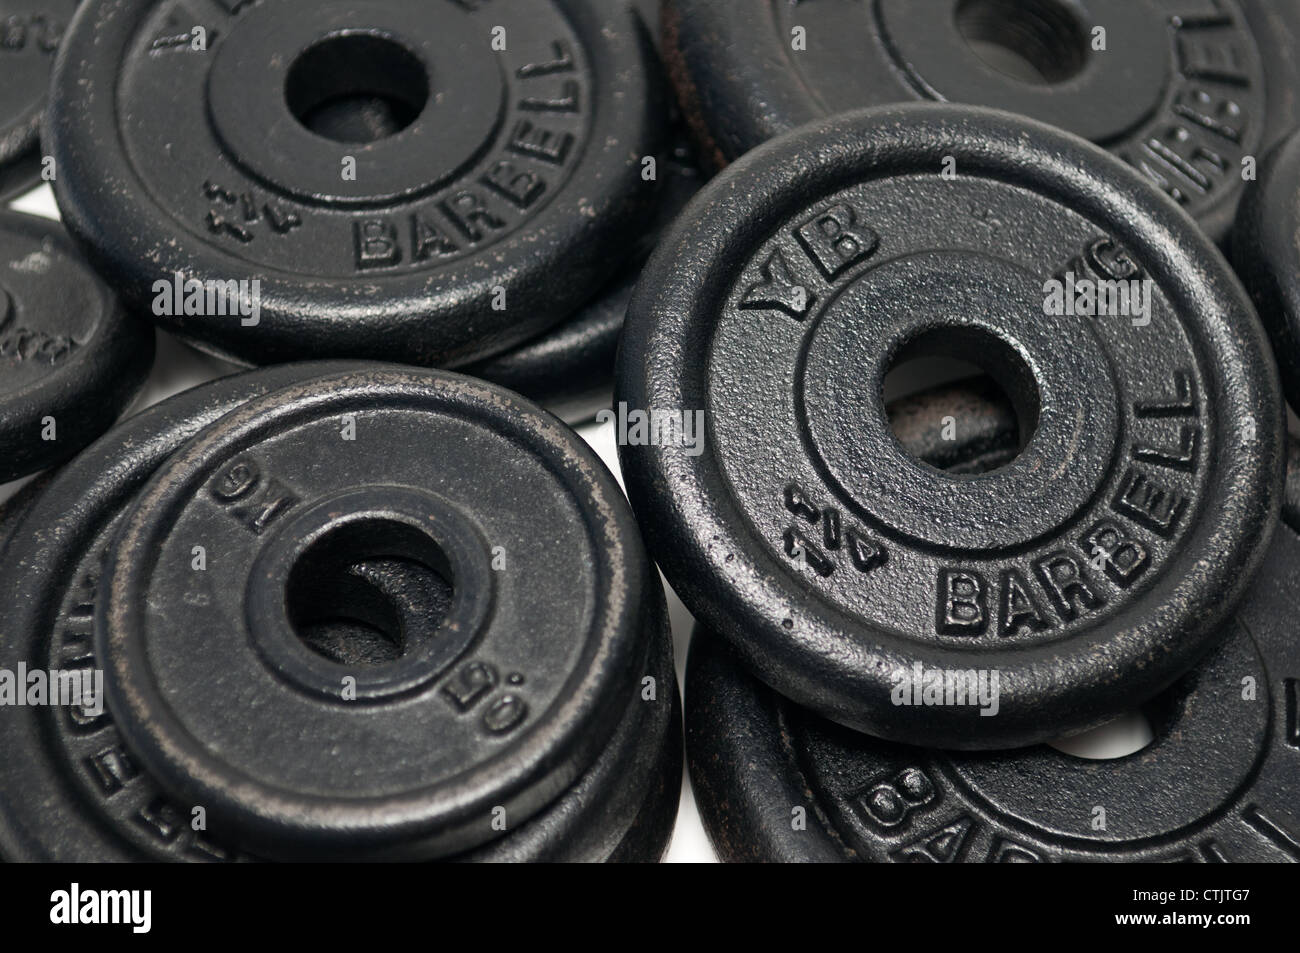 Pile of dumbbell weight discs Stock Photo